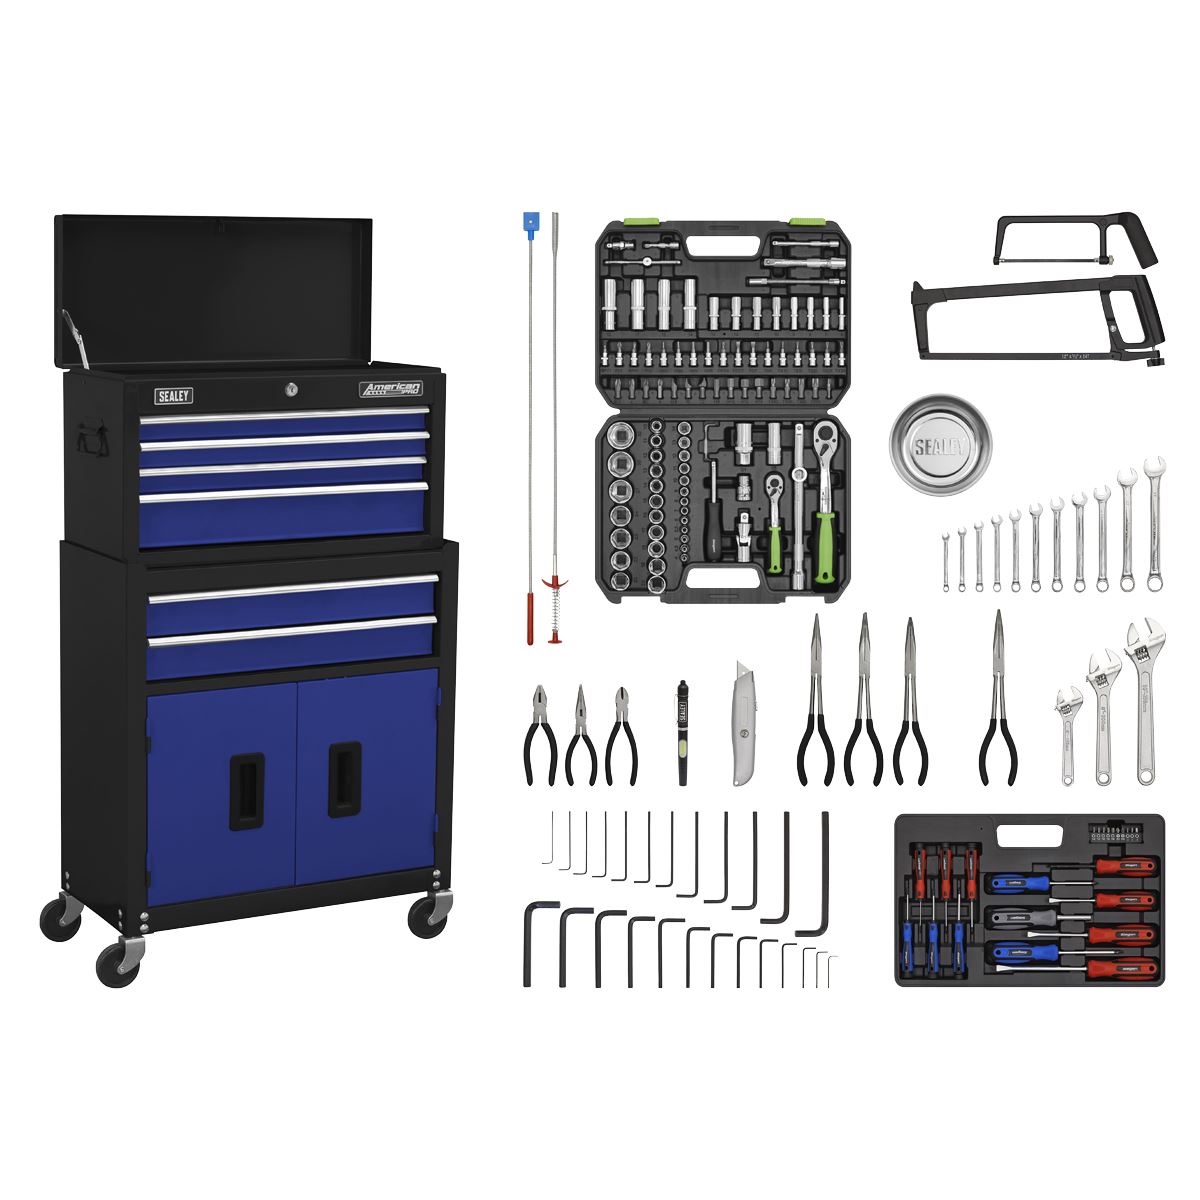 Sealey American Pro Topchest & Rollcab Combination 6 Drawer with Ball-Bearing Slides - Blue/Black & 170pc Tool Kit